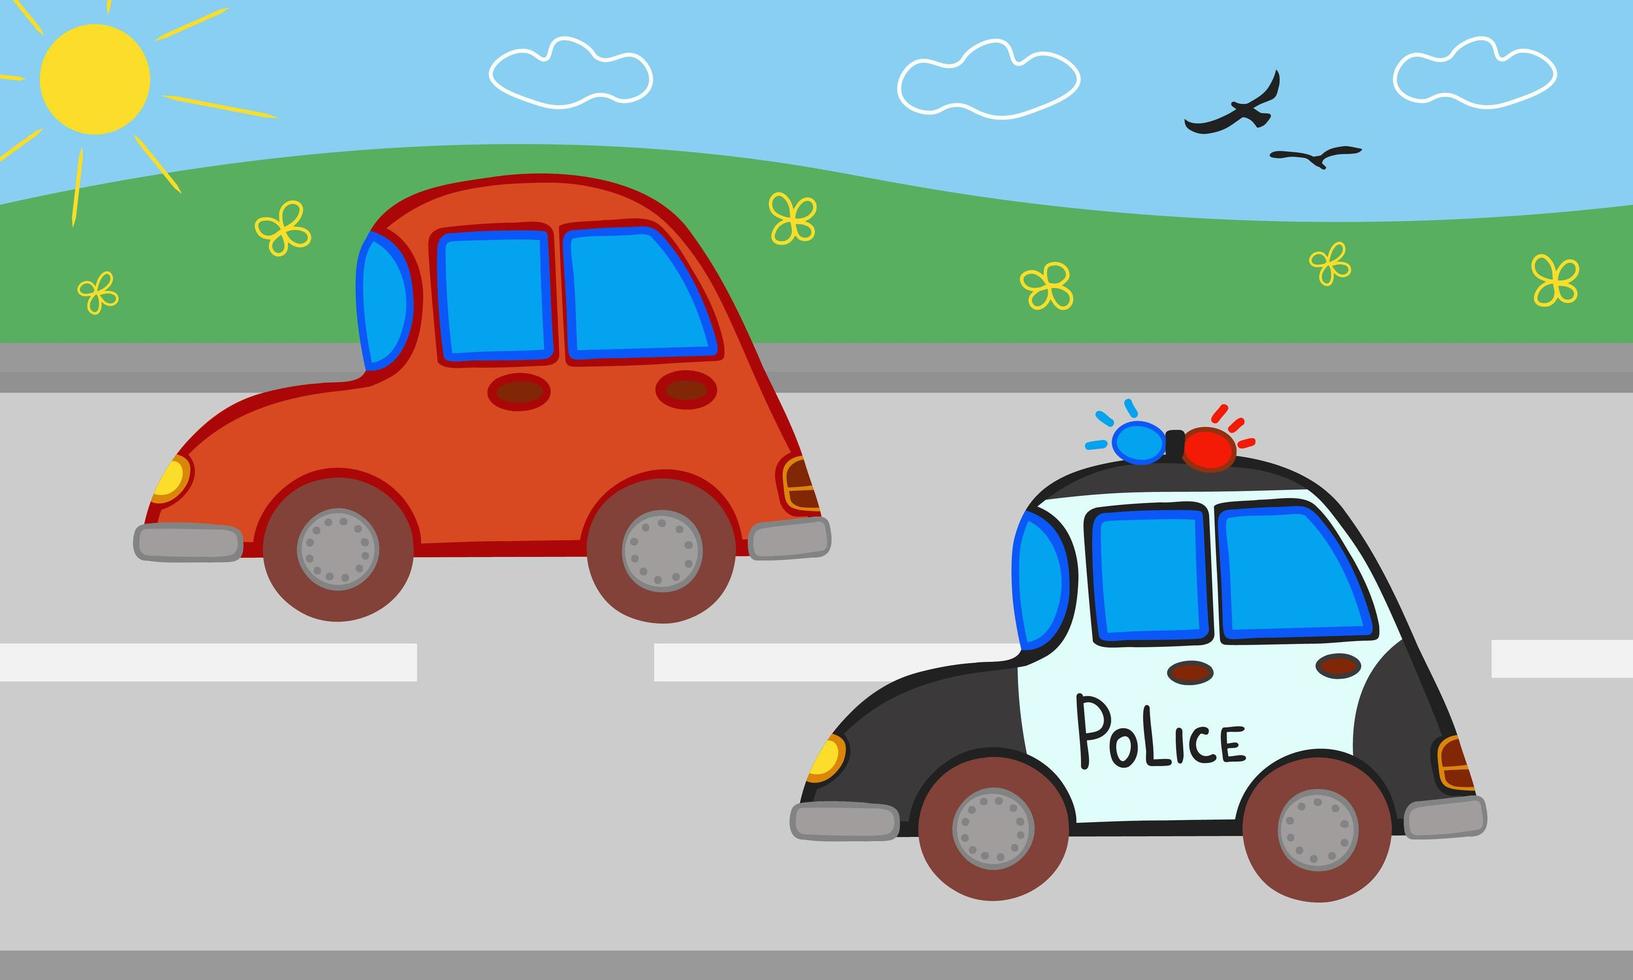 Police car, orange car driving along the road. Illustration for printing, background, wallpaper, covers, packaging, greeting cards, posters, stickers, textile, seasonal design